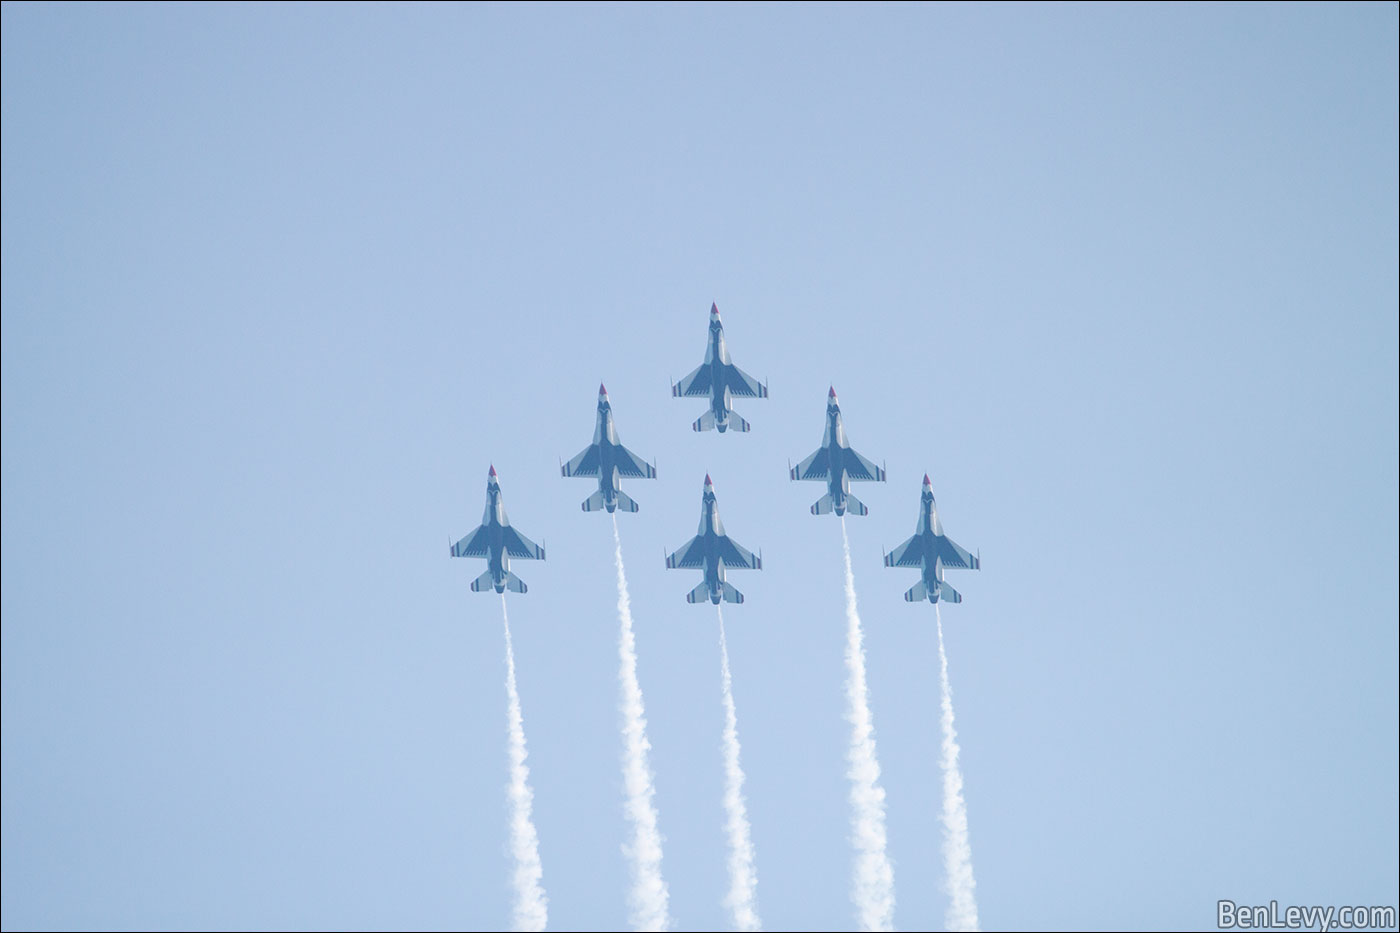 United States Air Force Thunderbirds